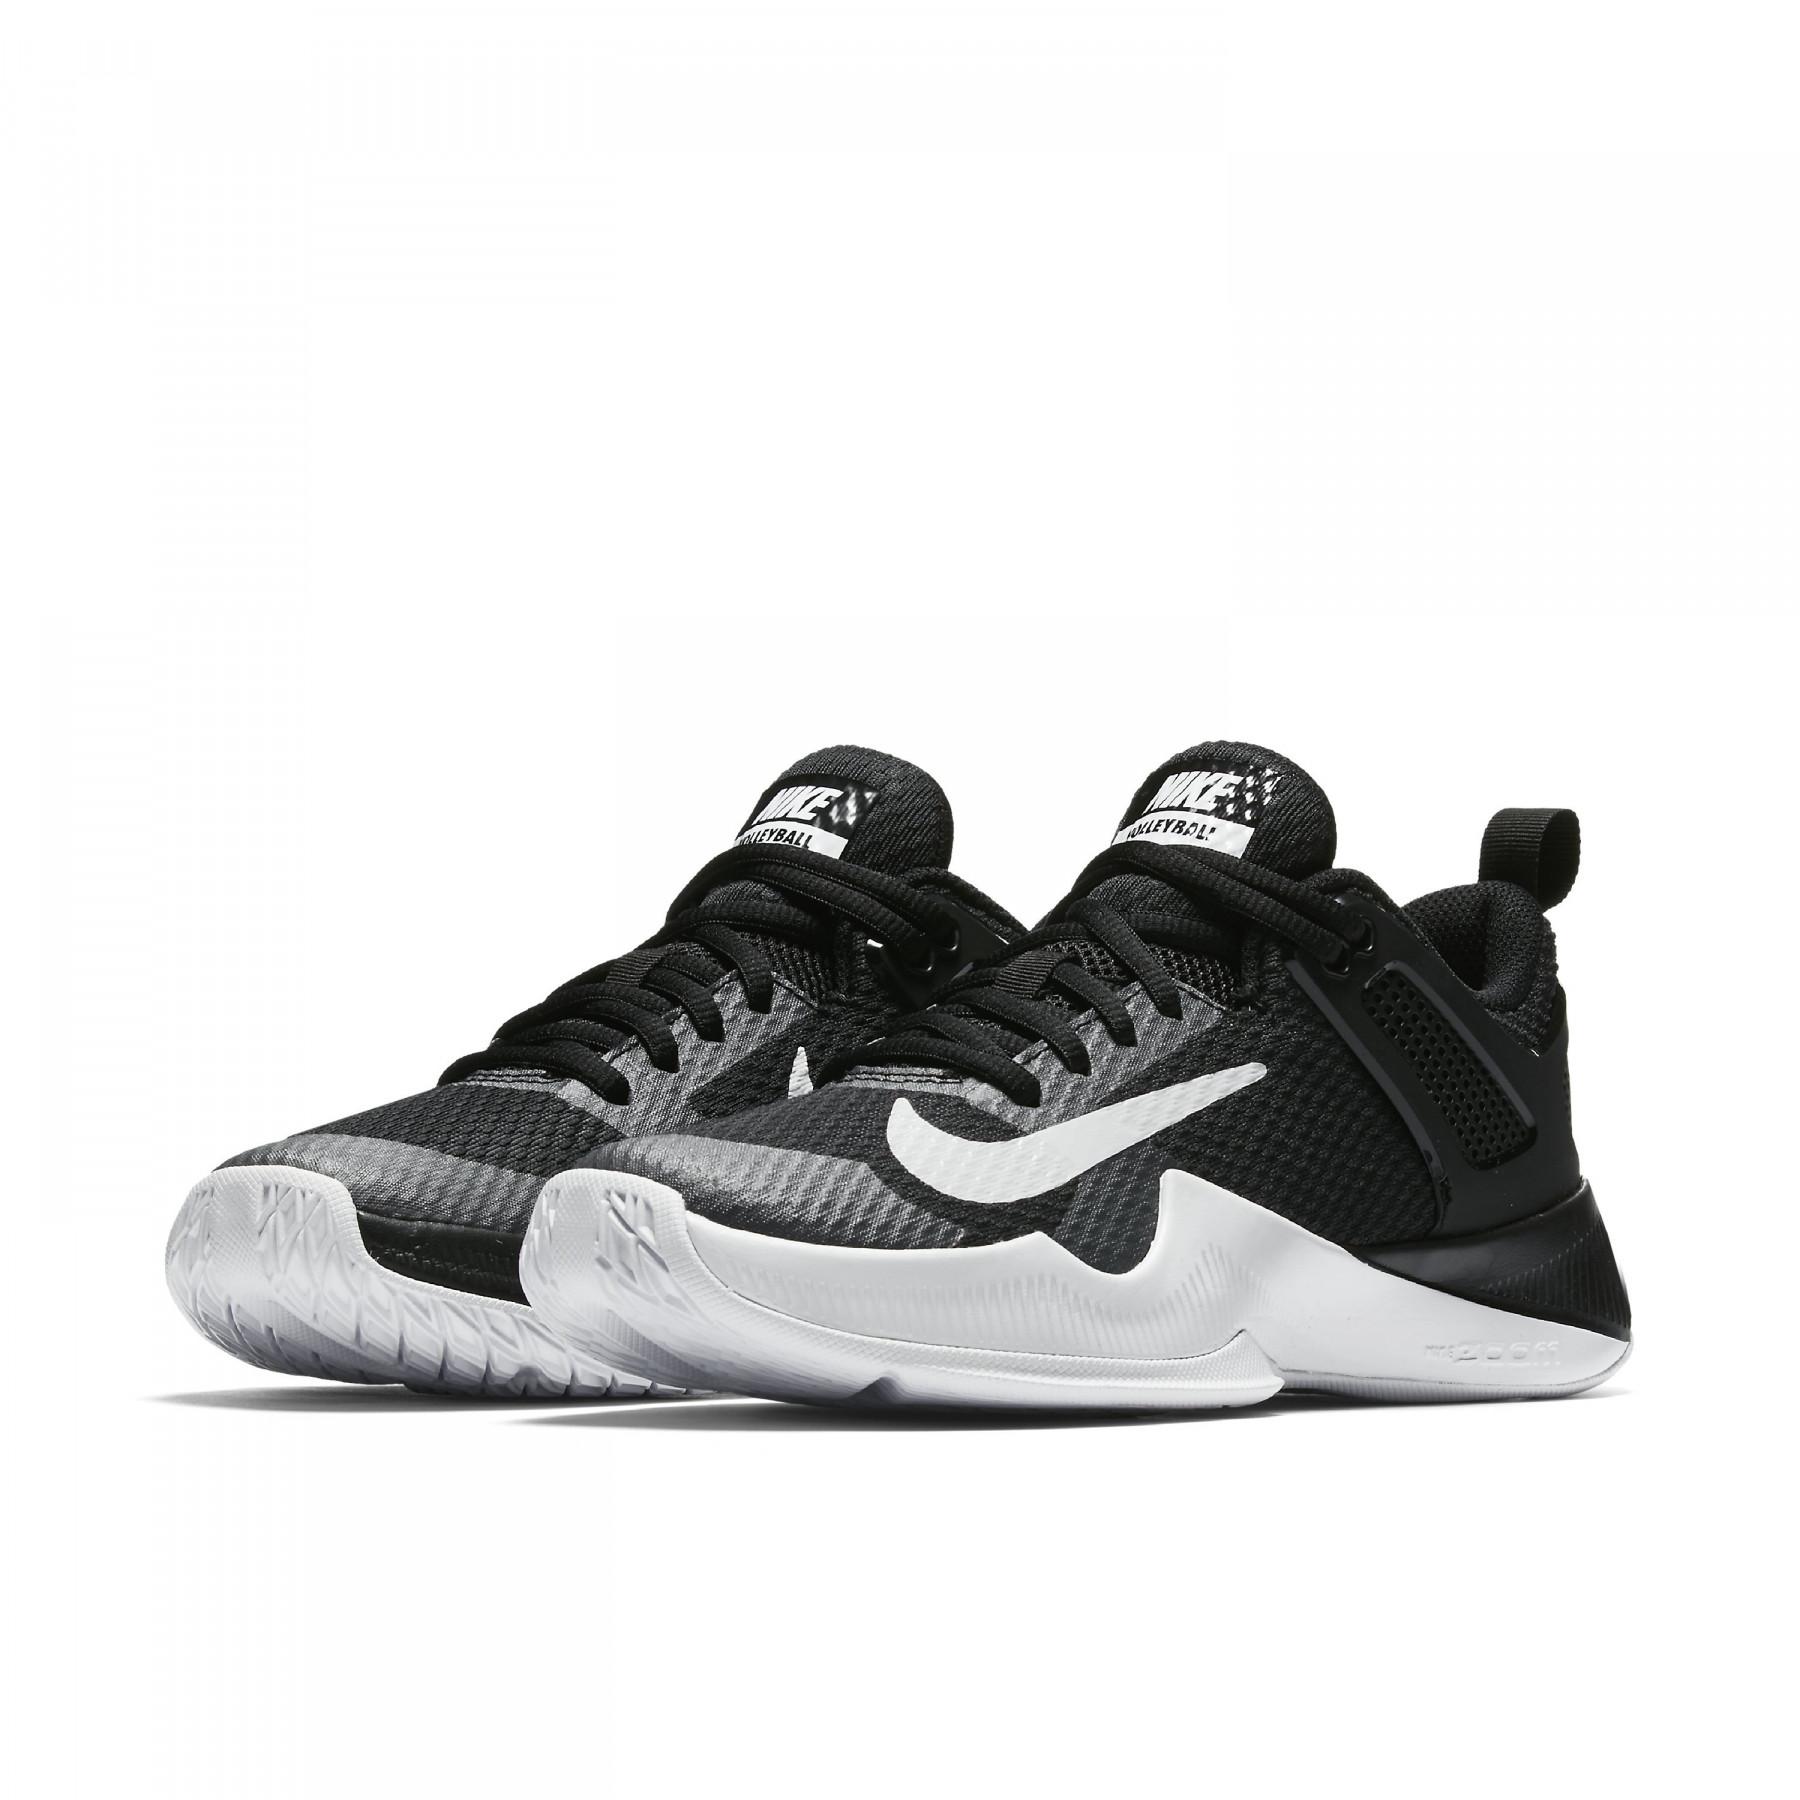 Chaussures Femme Nike Air Zoom Hyperace